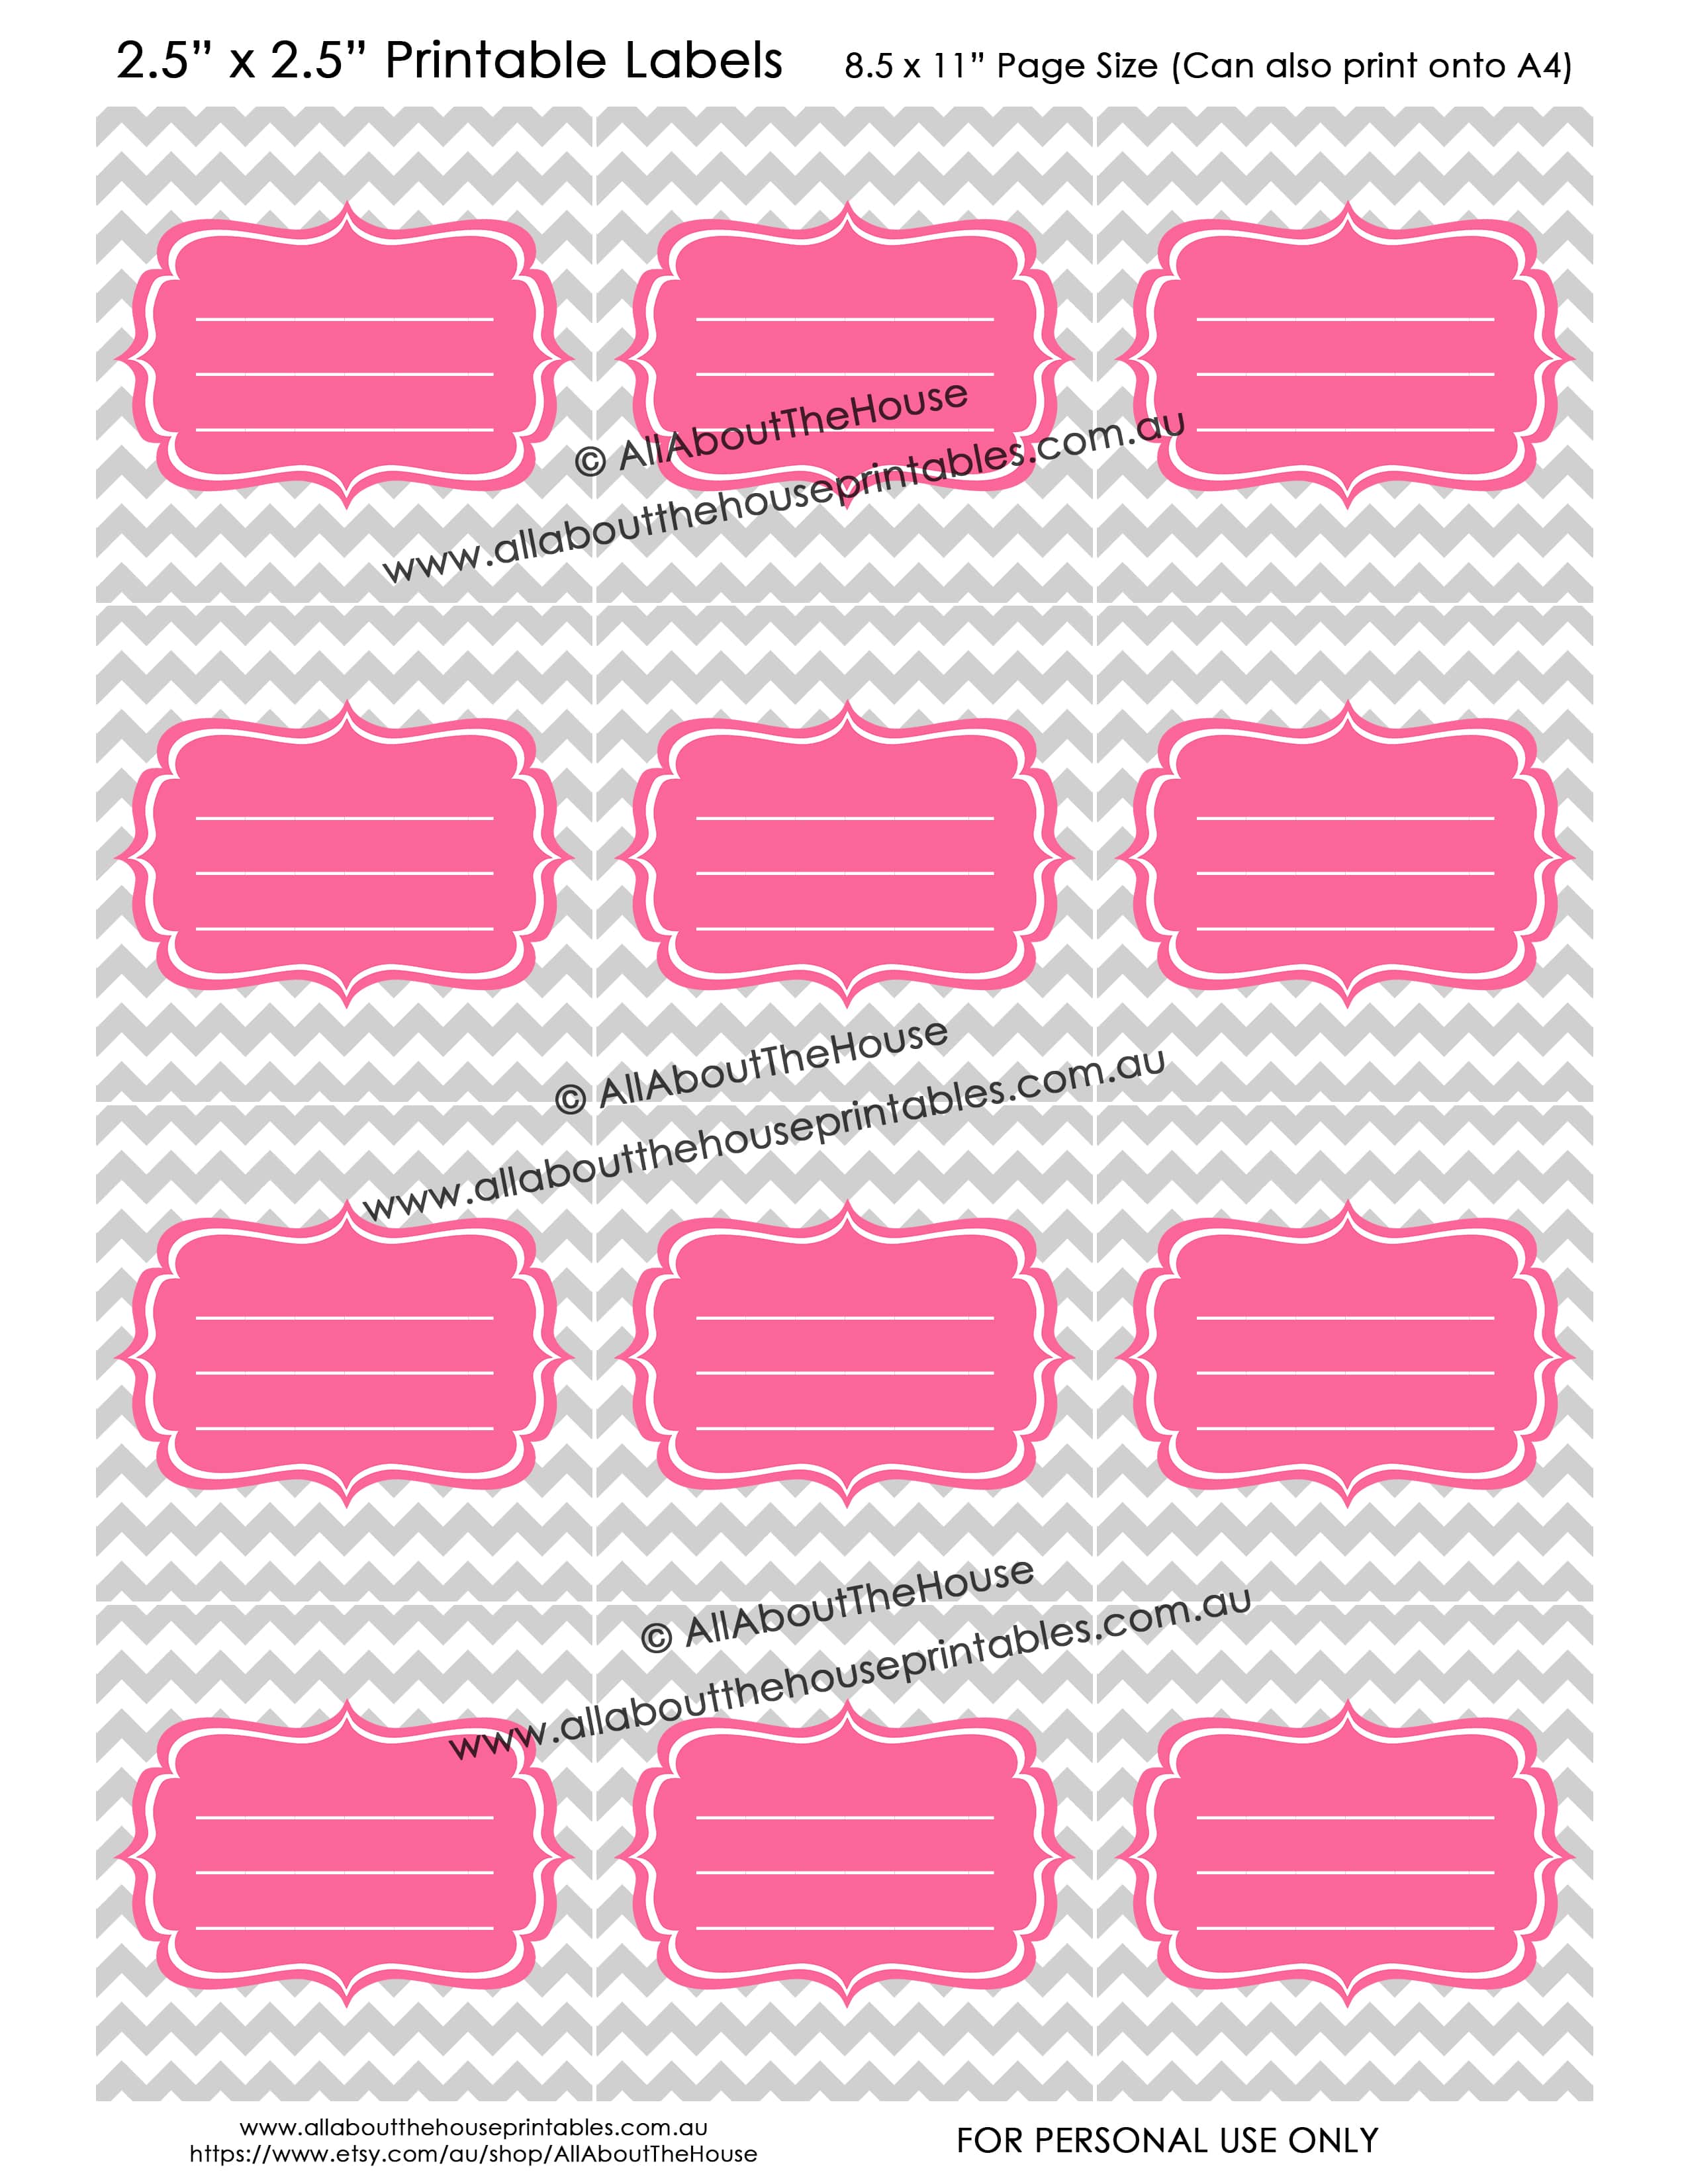 How to add your own text to printable labels (plus FREE printable cleaning labels!)